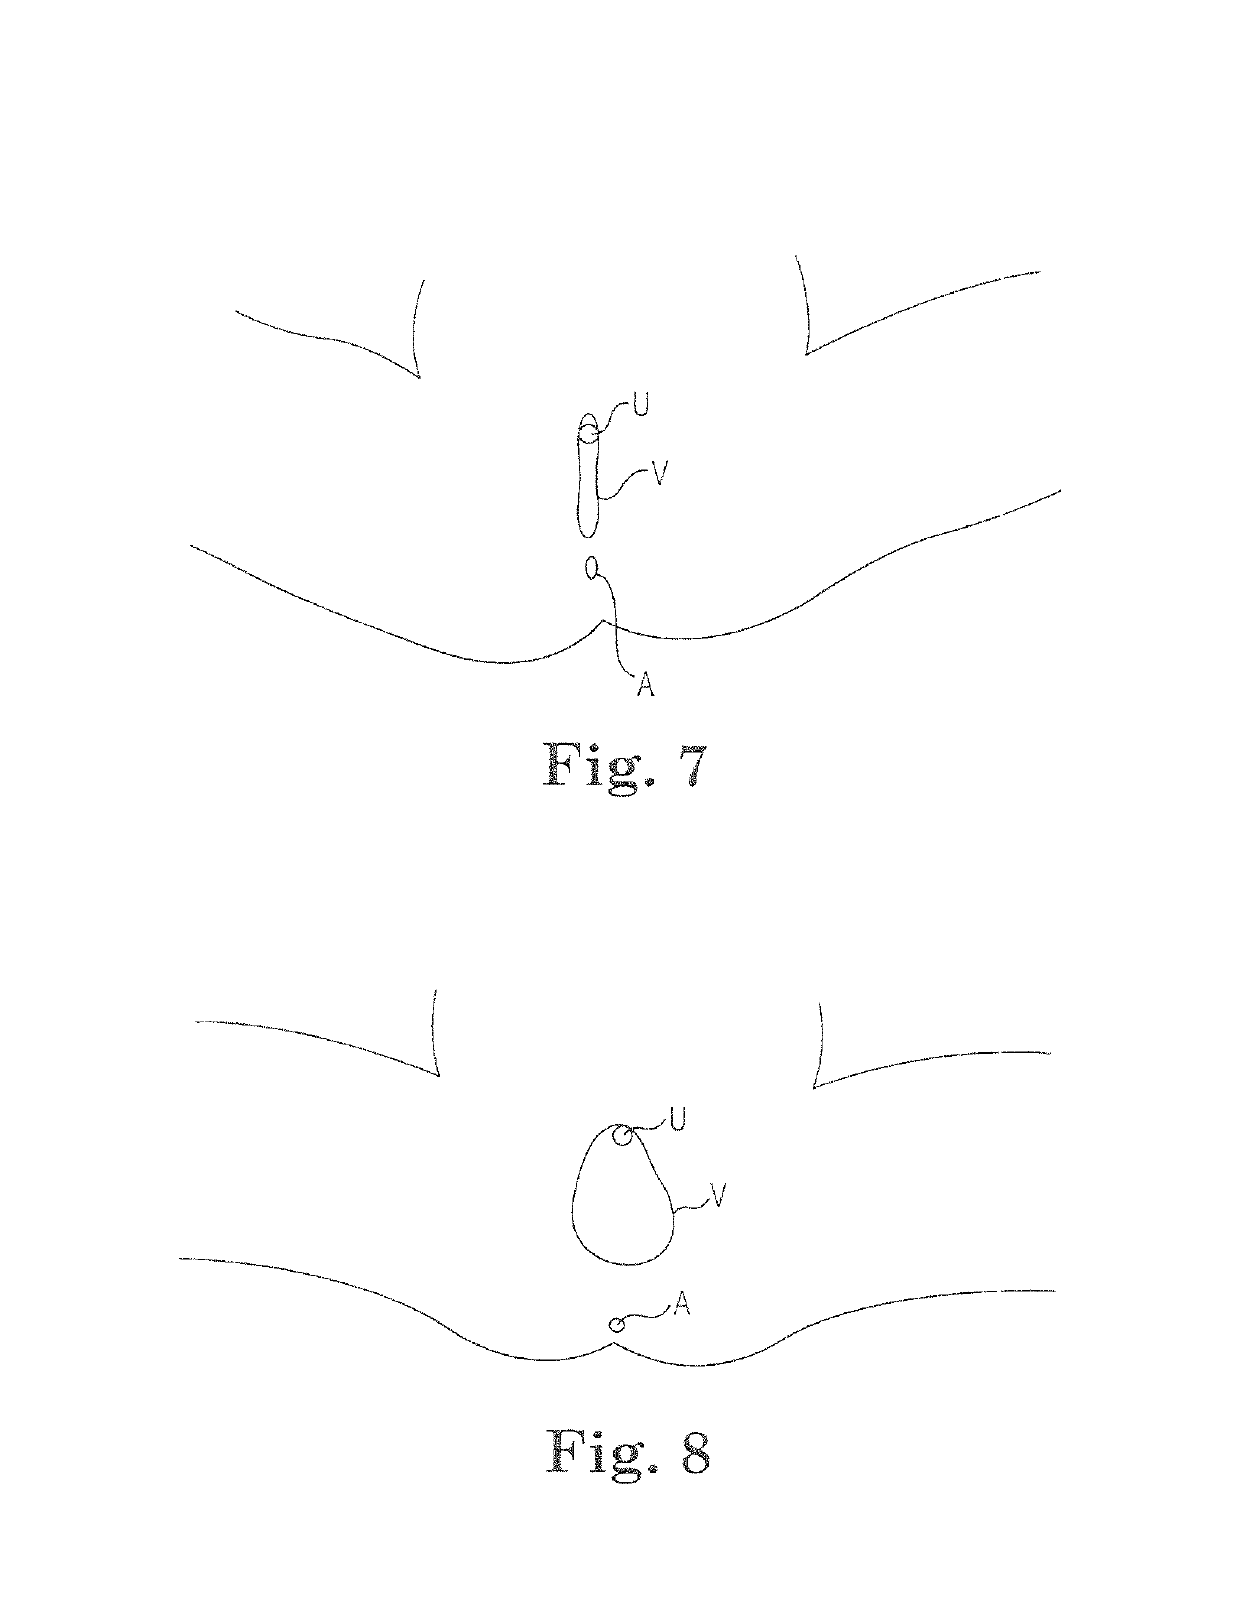 Elongate implant system and method for treating pelvic conditions